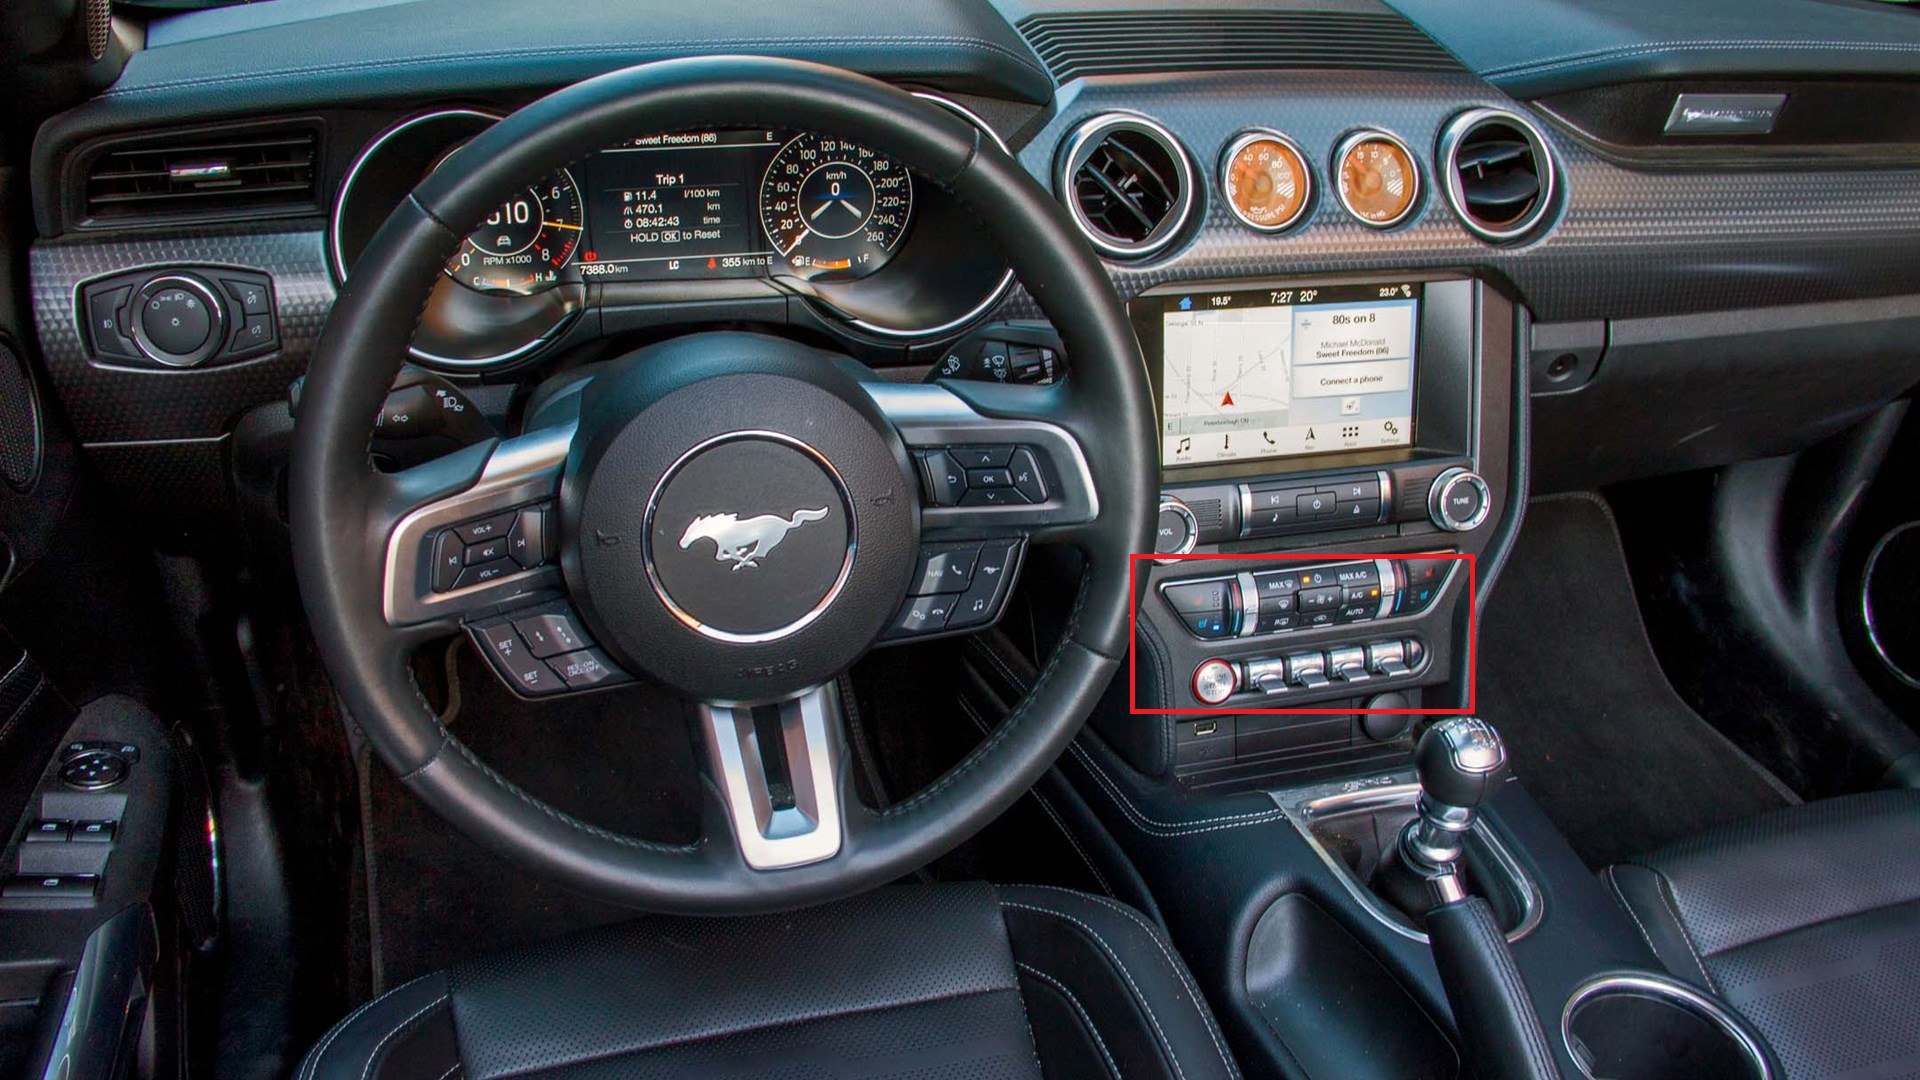 S650 Mustang The new dashboard is a big mistake IMO 1663366081538